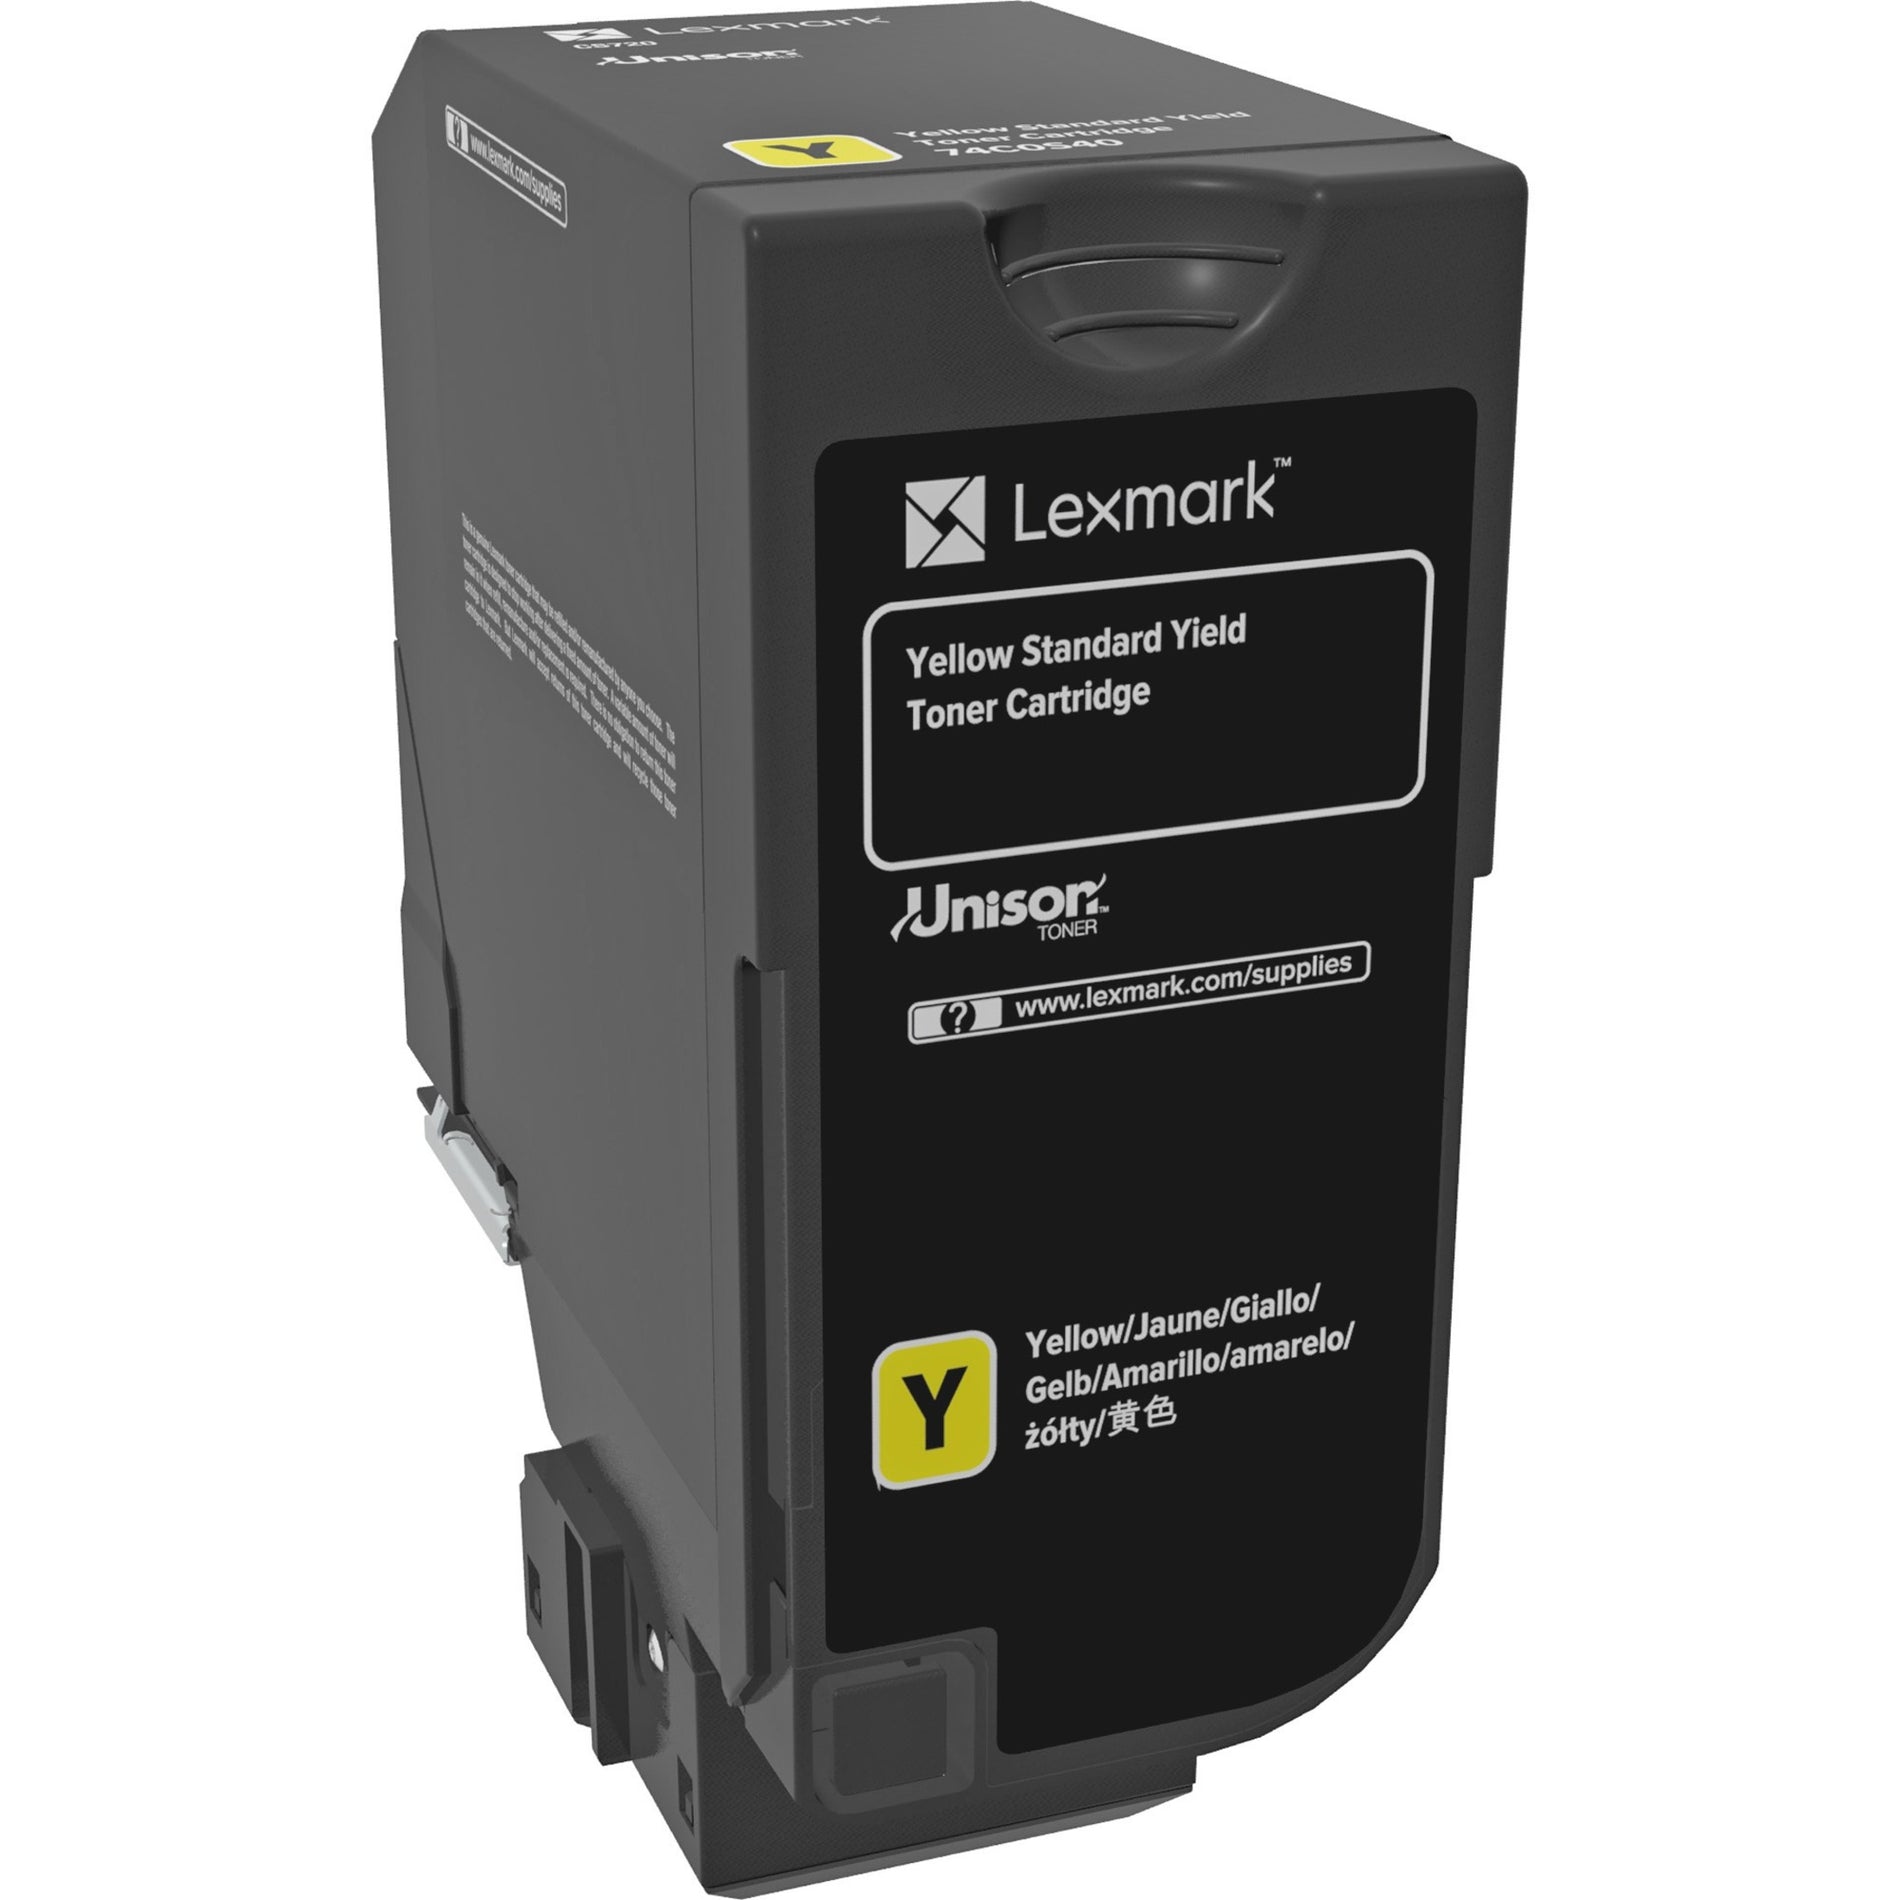 Lexmark 74C0S40 7K Yellow Toner Cartridge, for CS720, 7000 Pages Yield